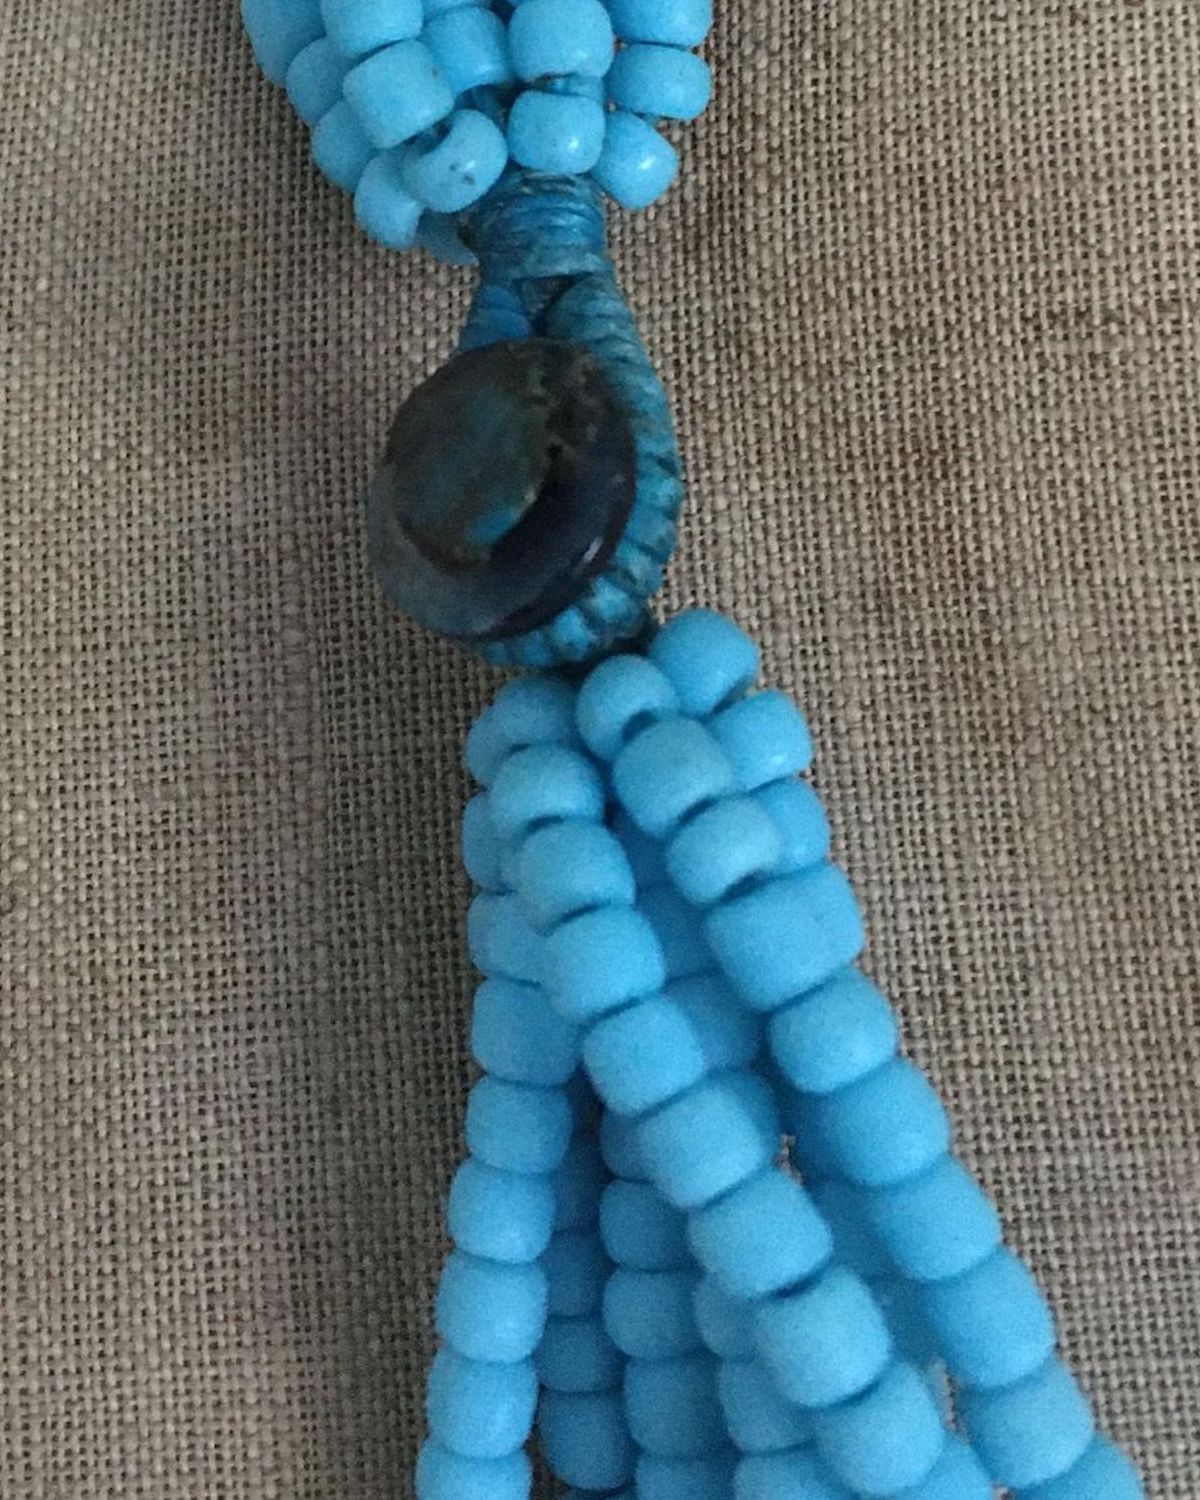 Light Blue Opaque Glass Bead Necklace with Bronze Accent | Tribal Style Necklace | Handmade in Myanmar - YGN Collective